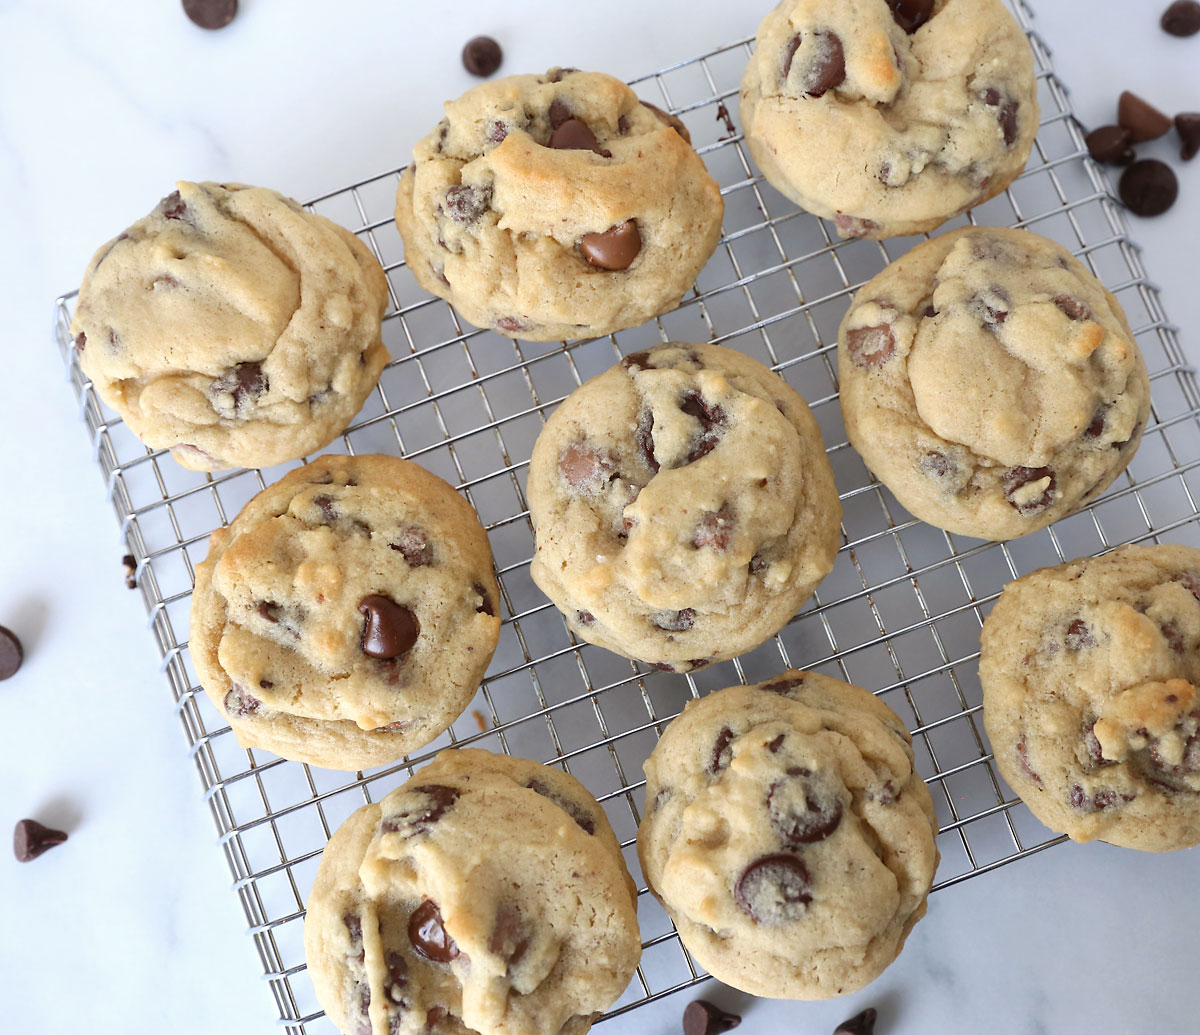 Soft, delicious chocolate chip cookies on a cooking rack